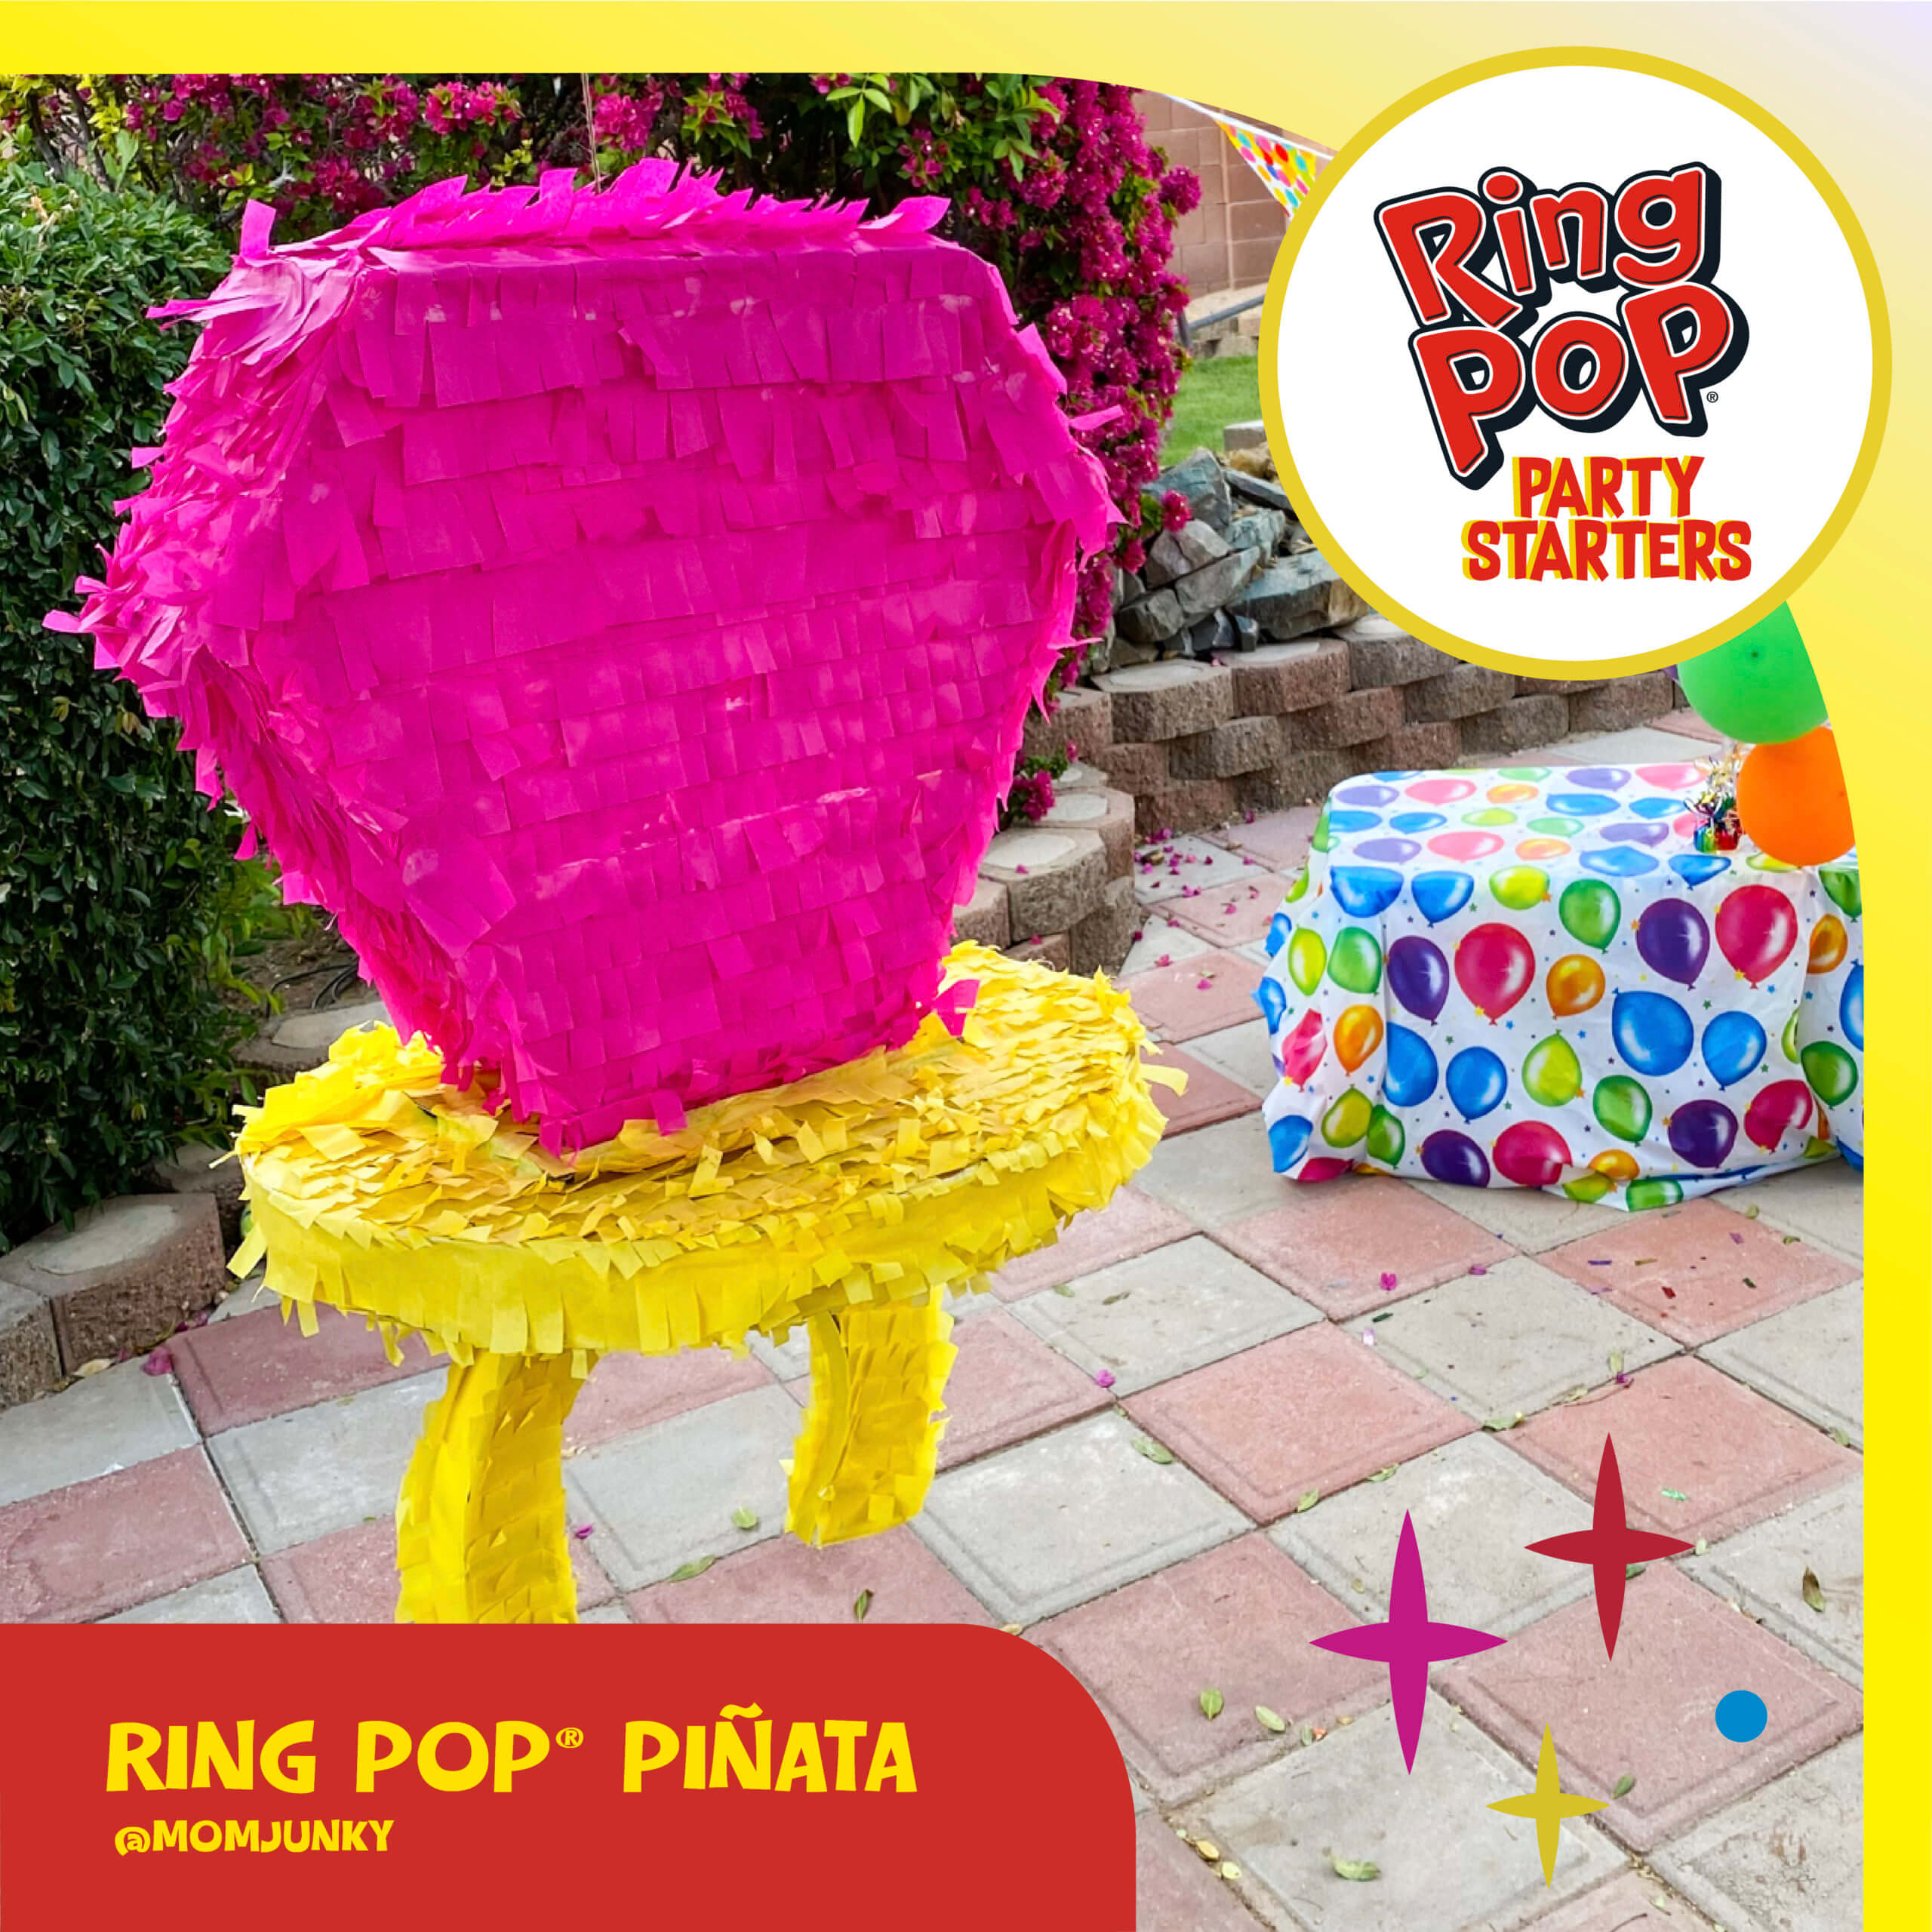 The Ultimate Birthday Party with a Ring Pop® Piñata